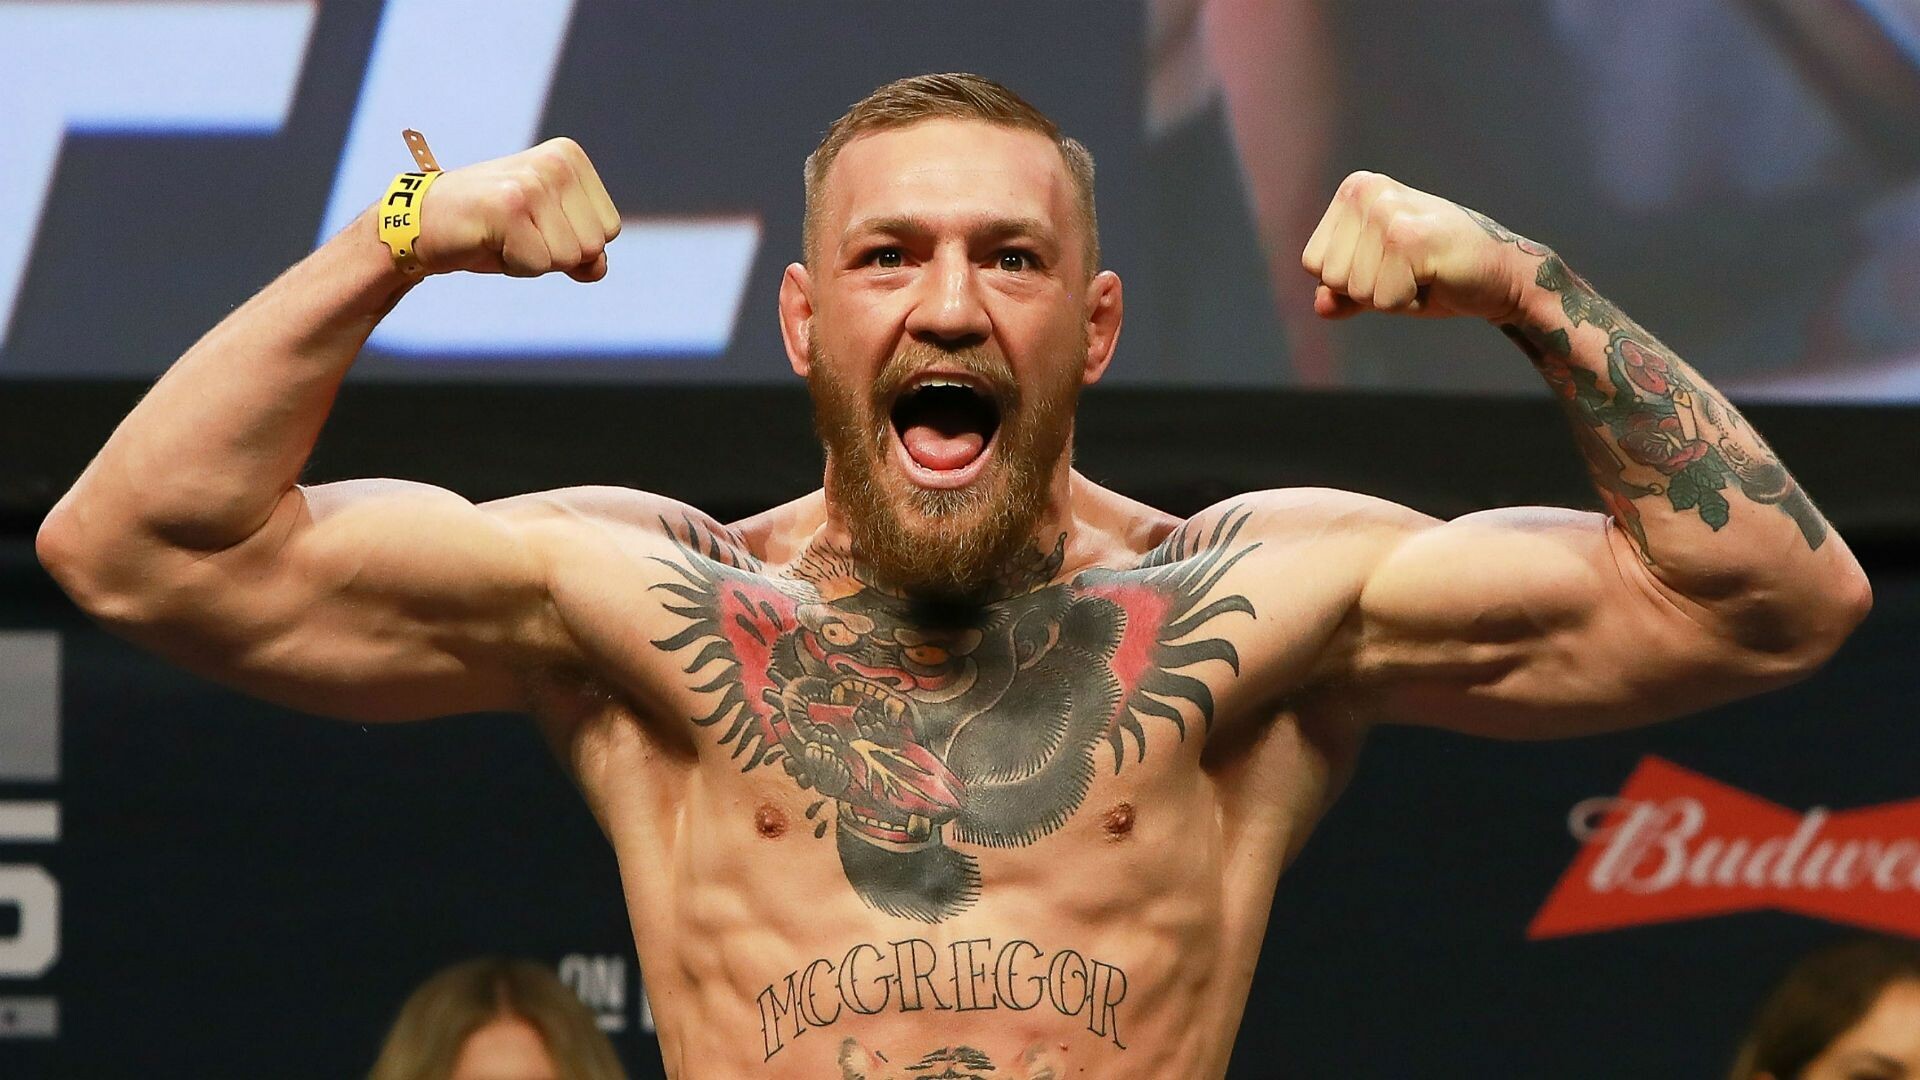 Conor McGregor: 2014 and 2015 International Fighter of the Year, An Irish professional mixed martial artist. 1920x1080 Full HD Wallpaper.